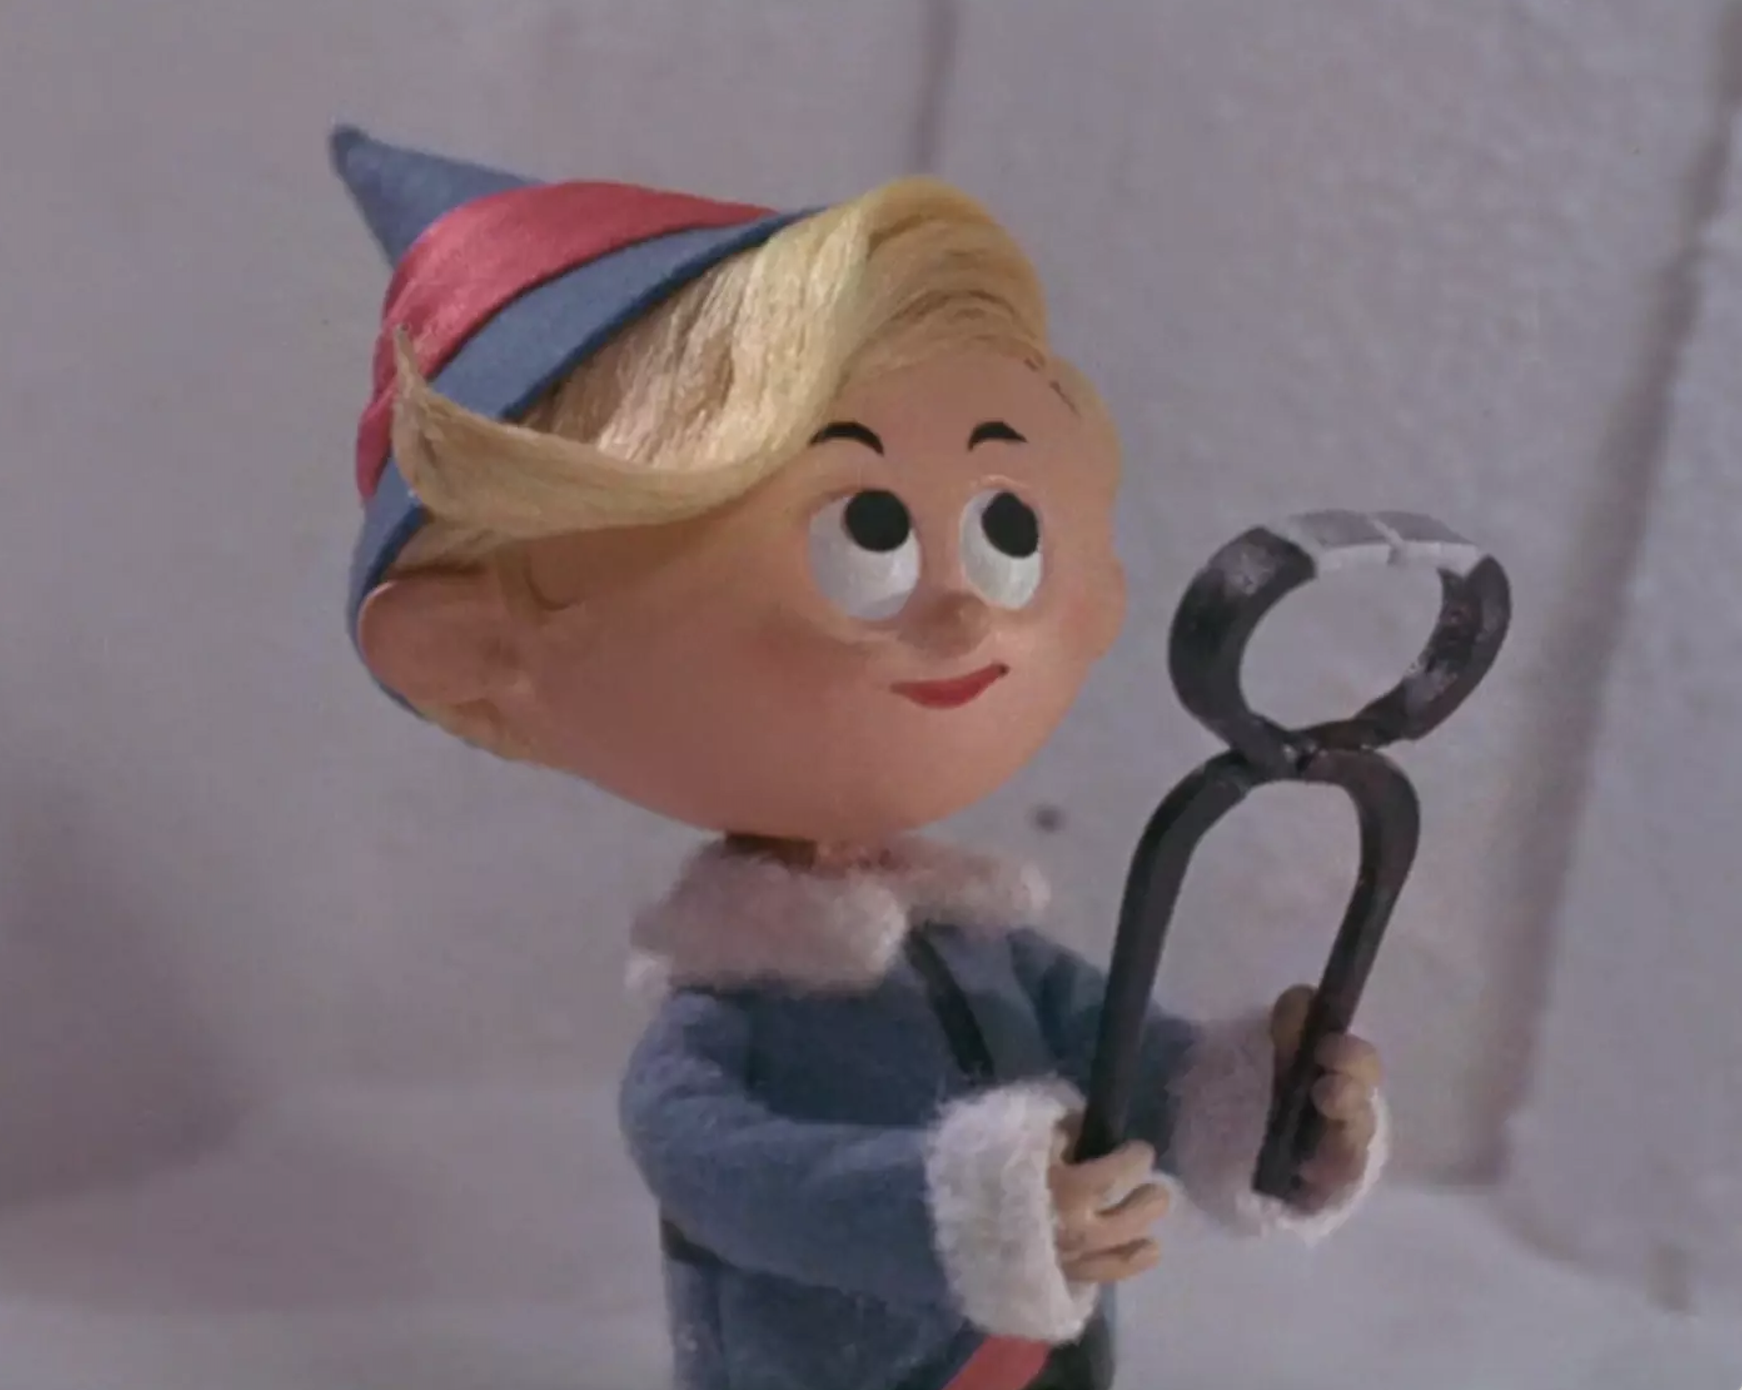 hermey the elf holding a tooth extractor